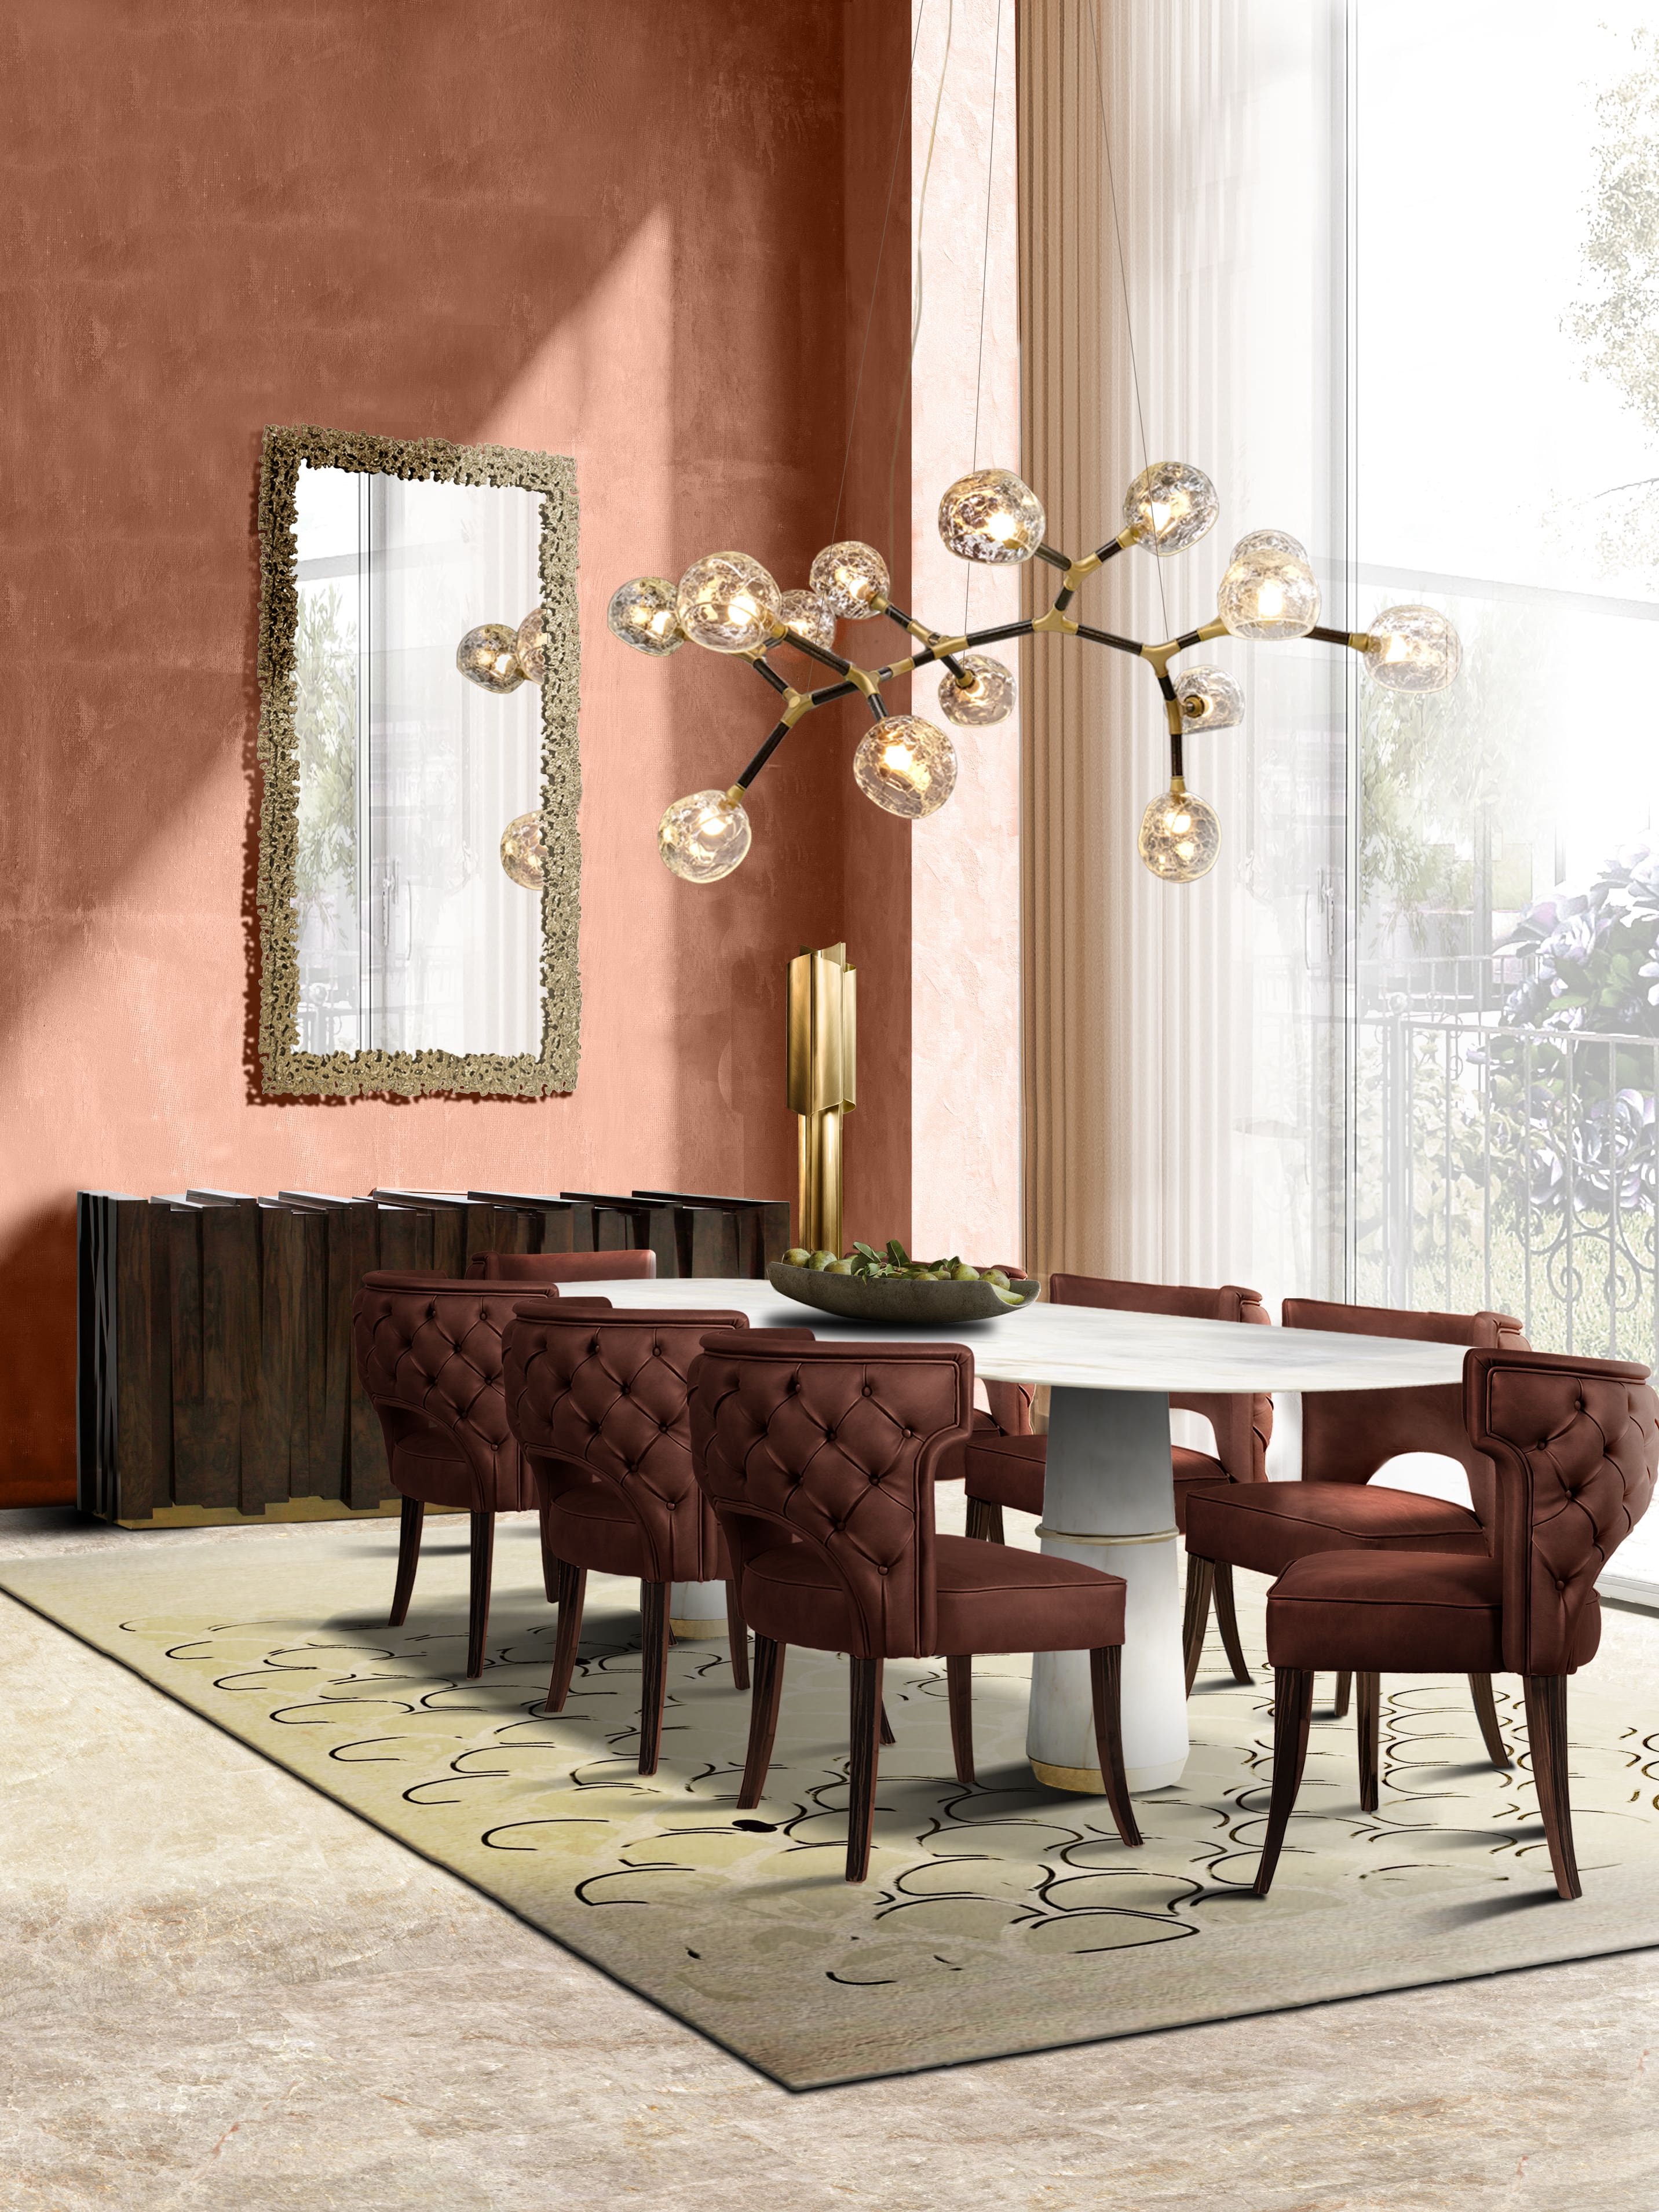 Dining Room Decor In Burgundy Tones - Home'Society